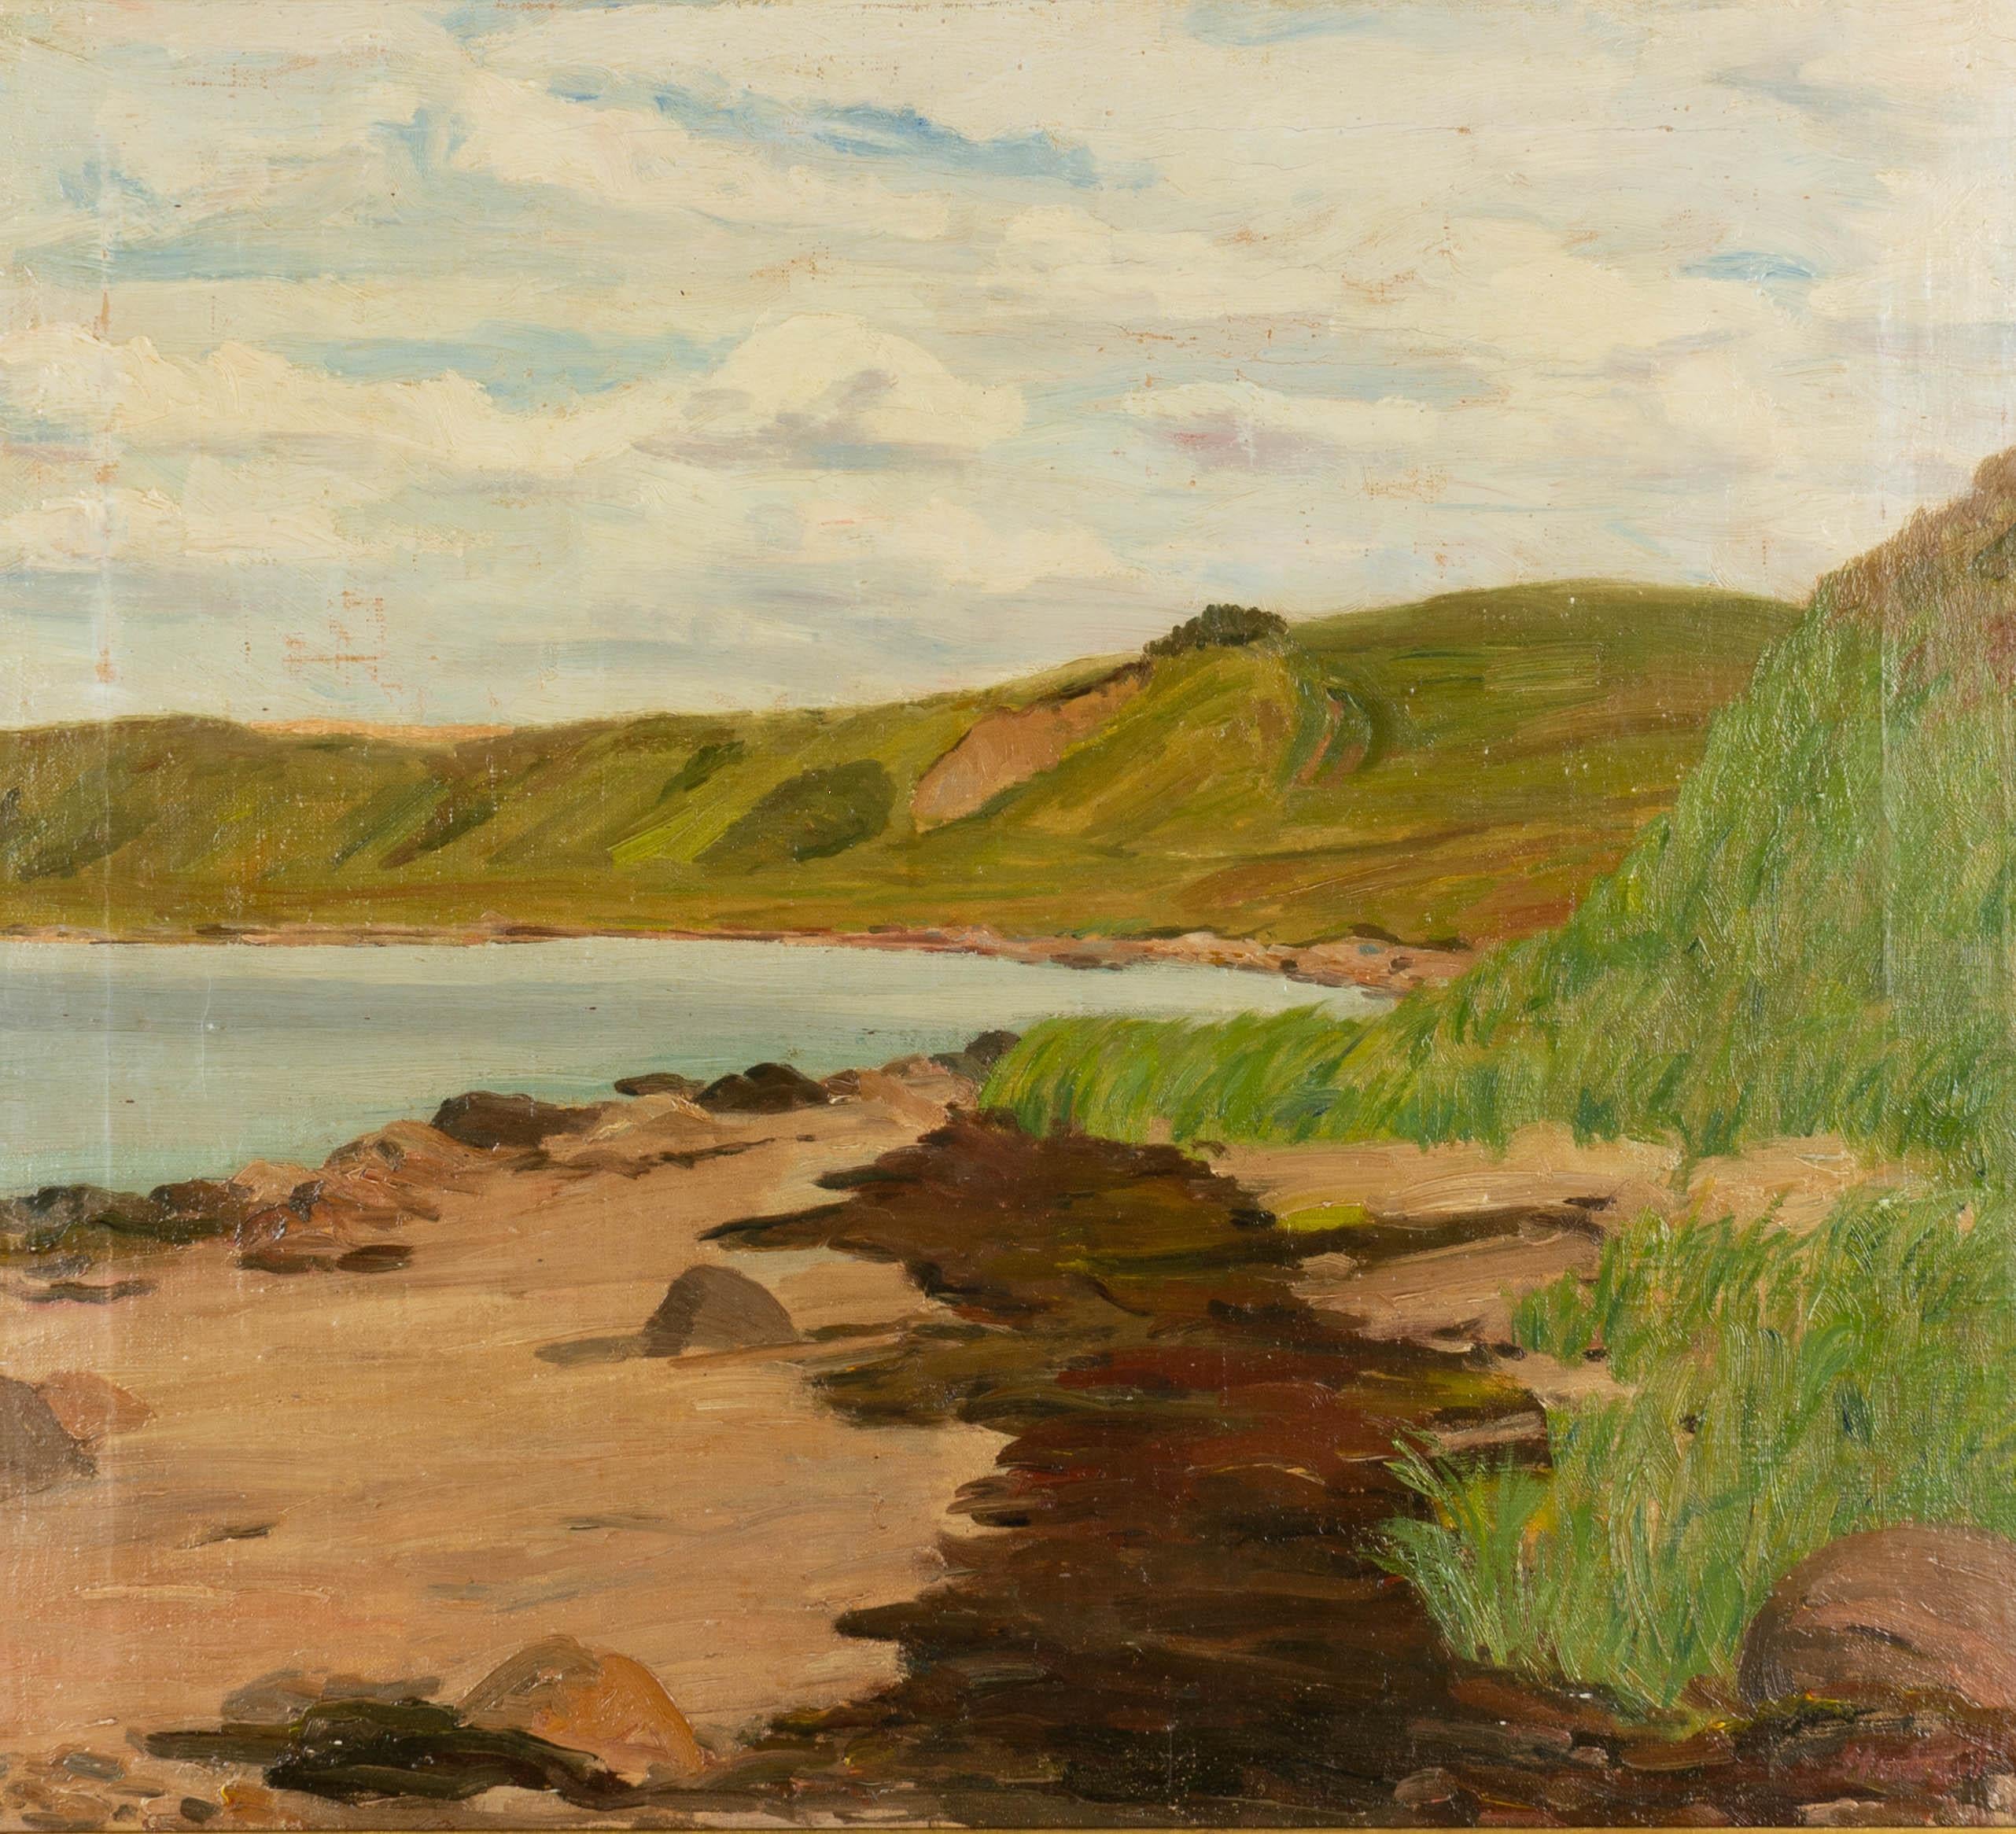 A coastal landscape painting by C. V. Stubbe Teglbjærg (Danish 1894-1971). Oil on canvas. Signed lower right. Dated verso: 1947.
Measures: Frame: 21.25